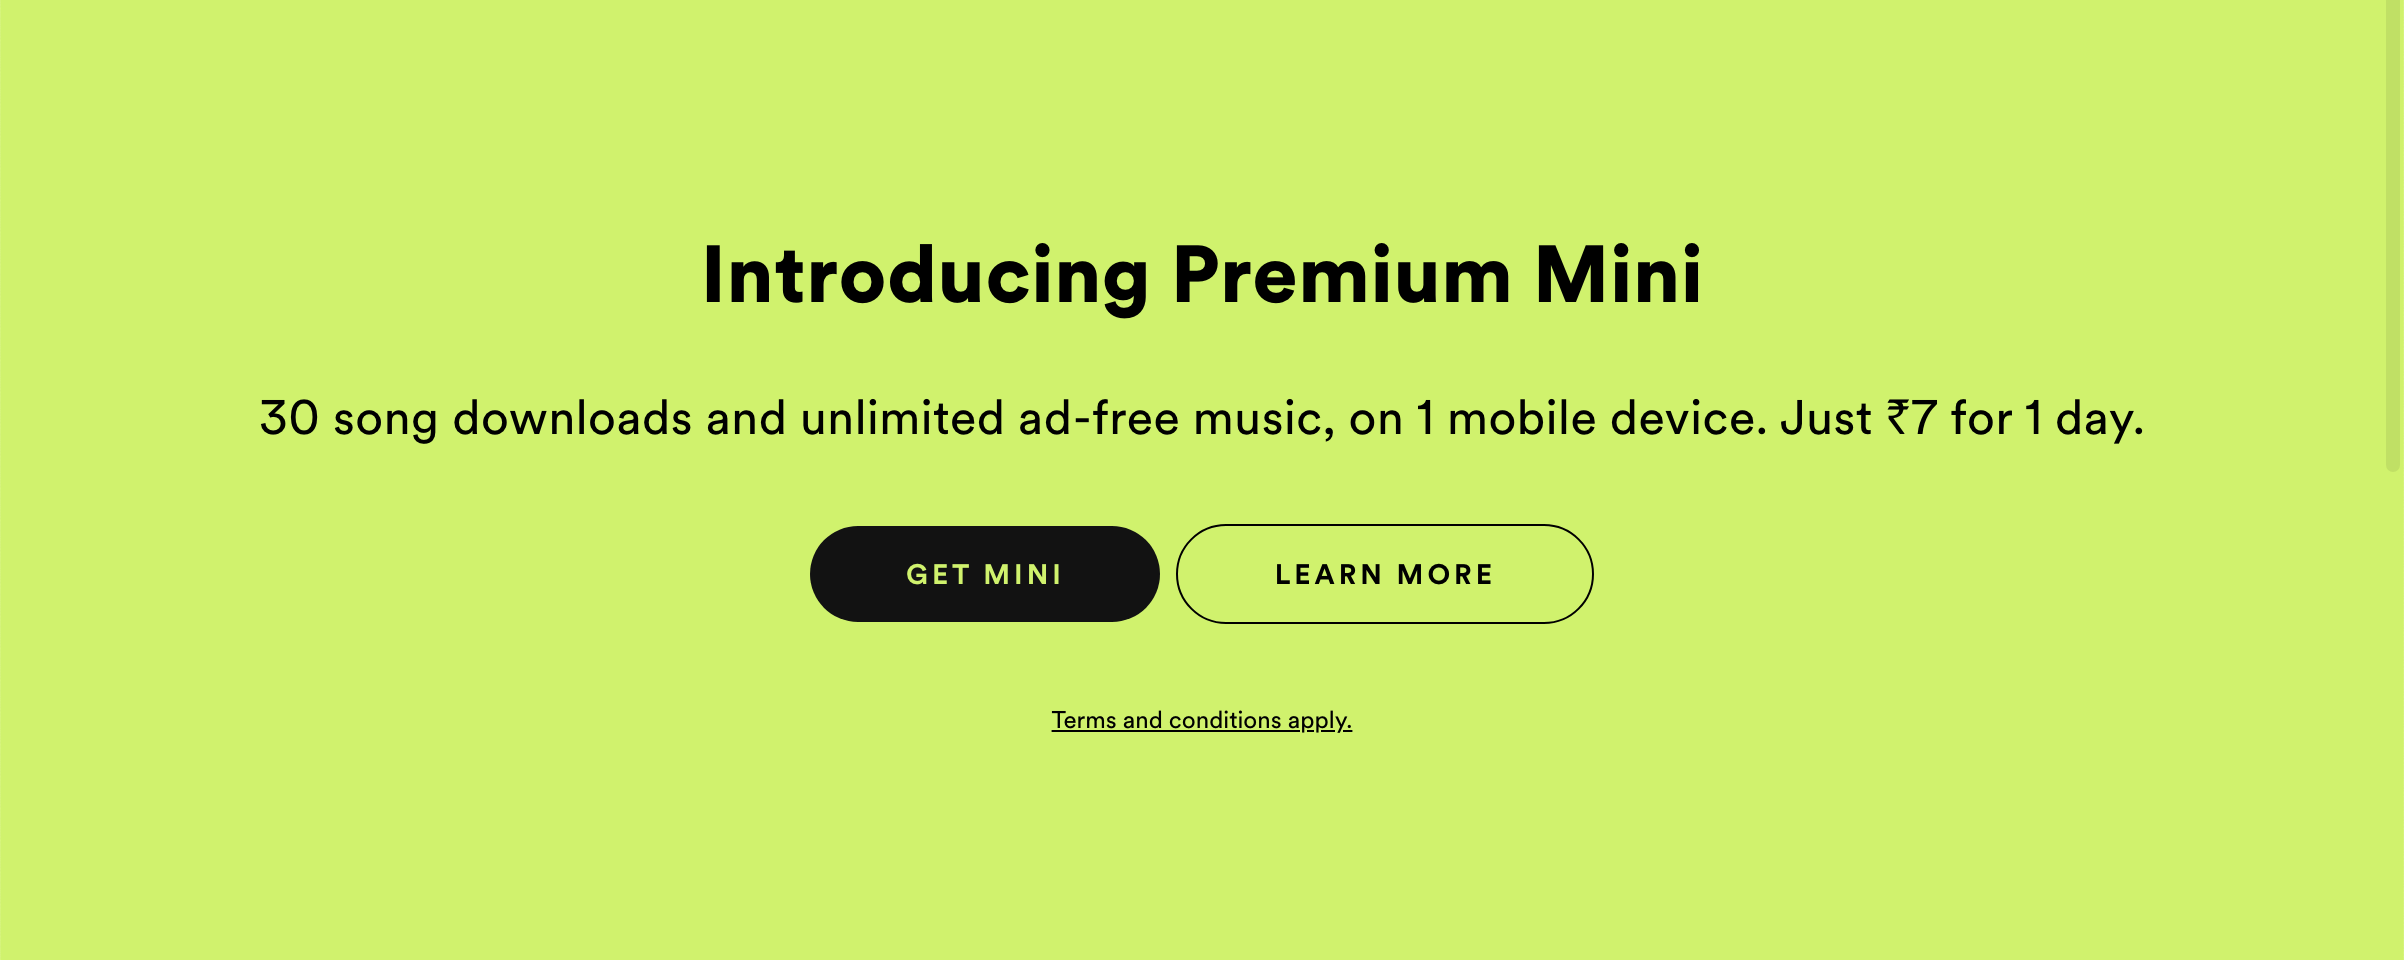 Spotify introduce Premium Mini in India – Unlimited ad-free music for 7 rupees/day or 25 rupees/week